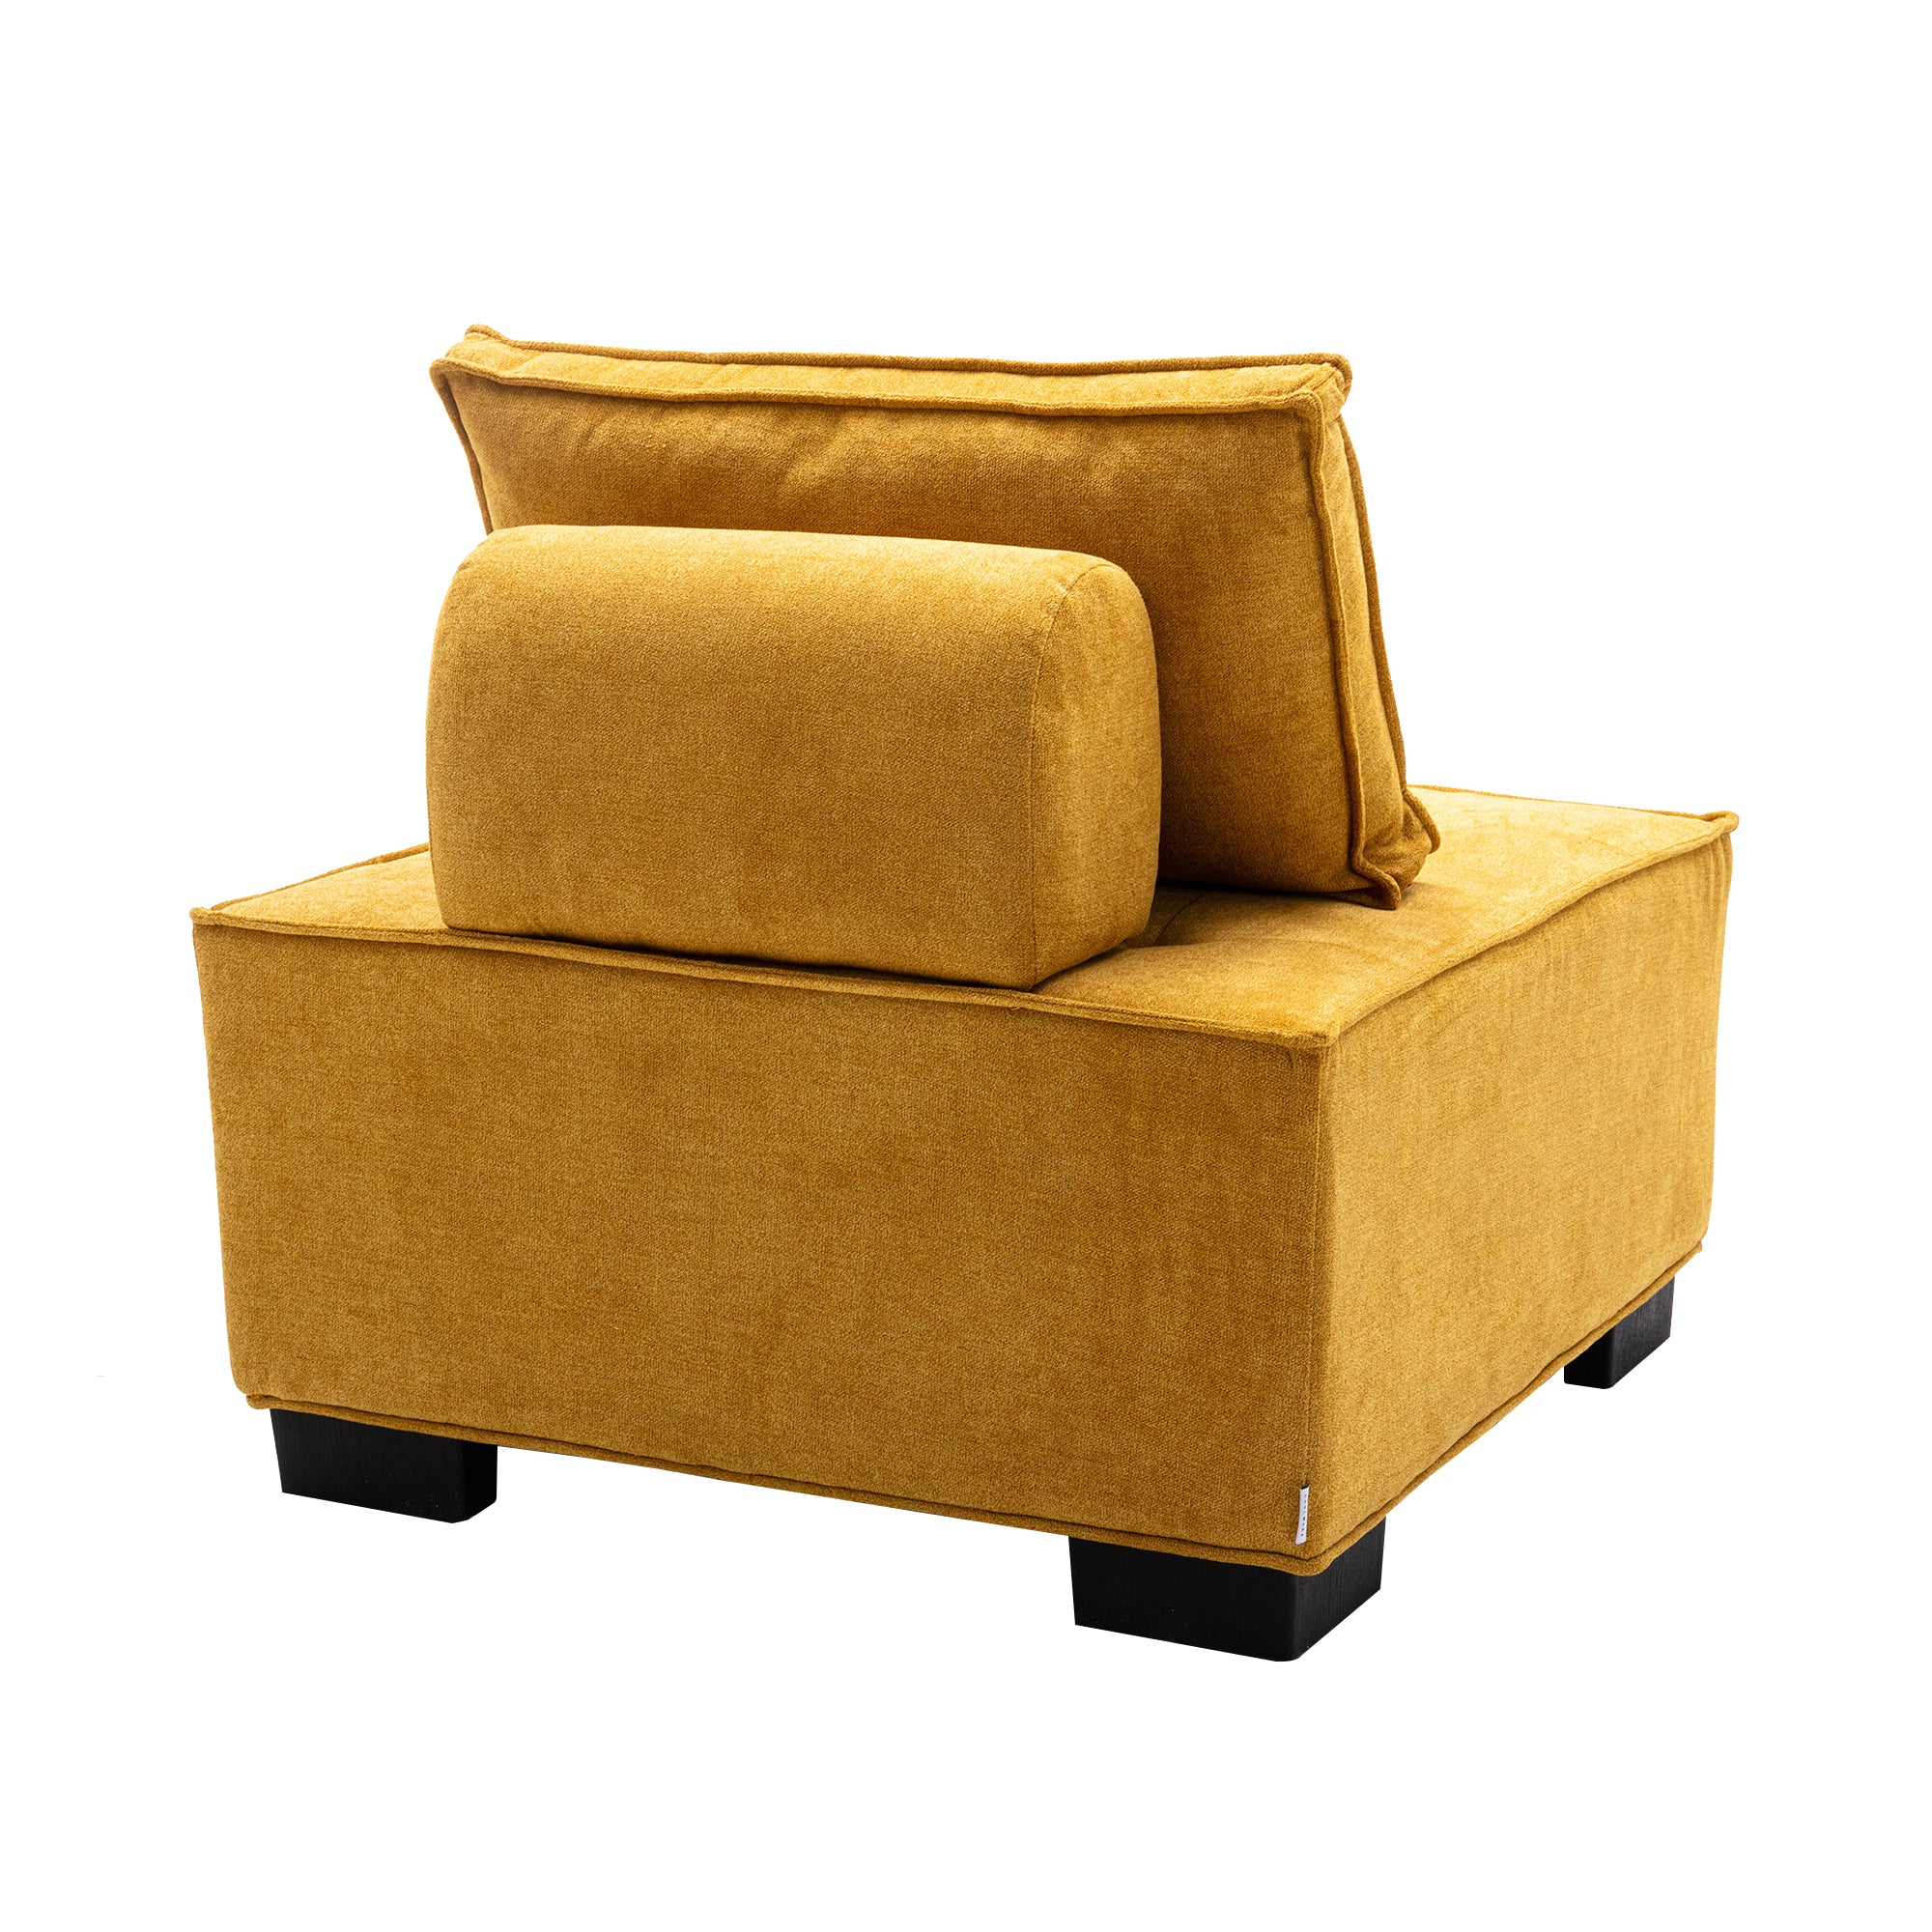 COOMORE Living Room Sofa Chair